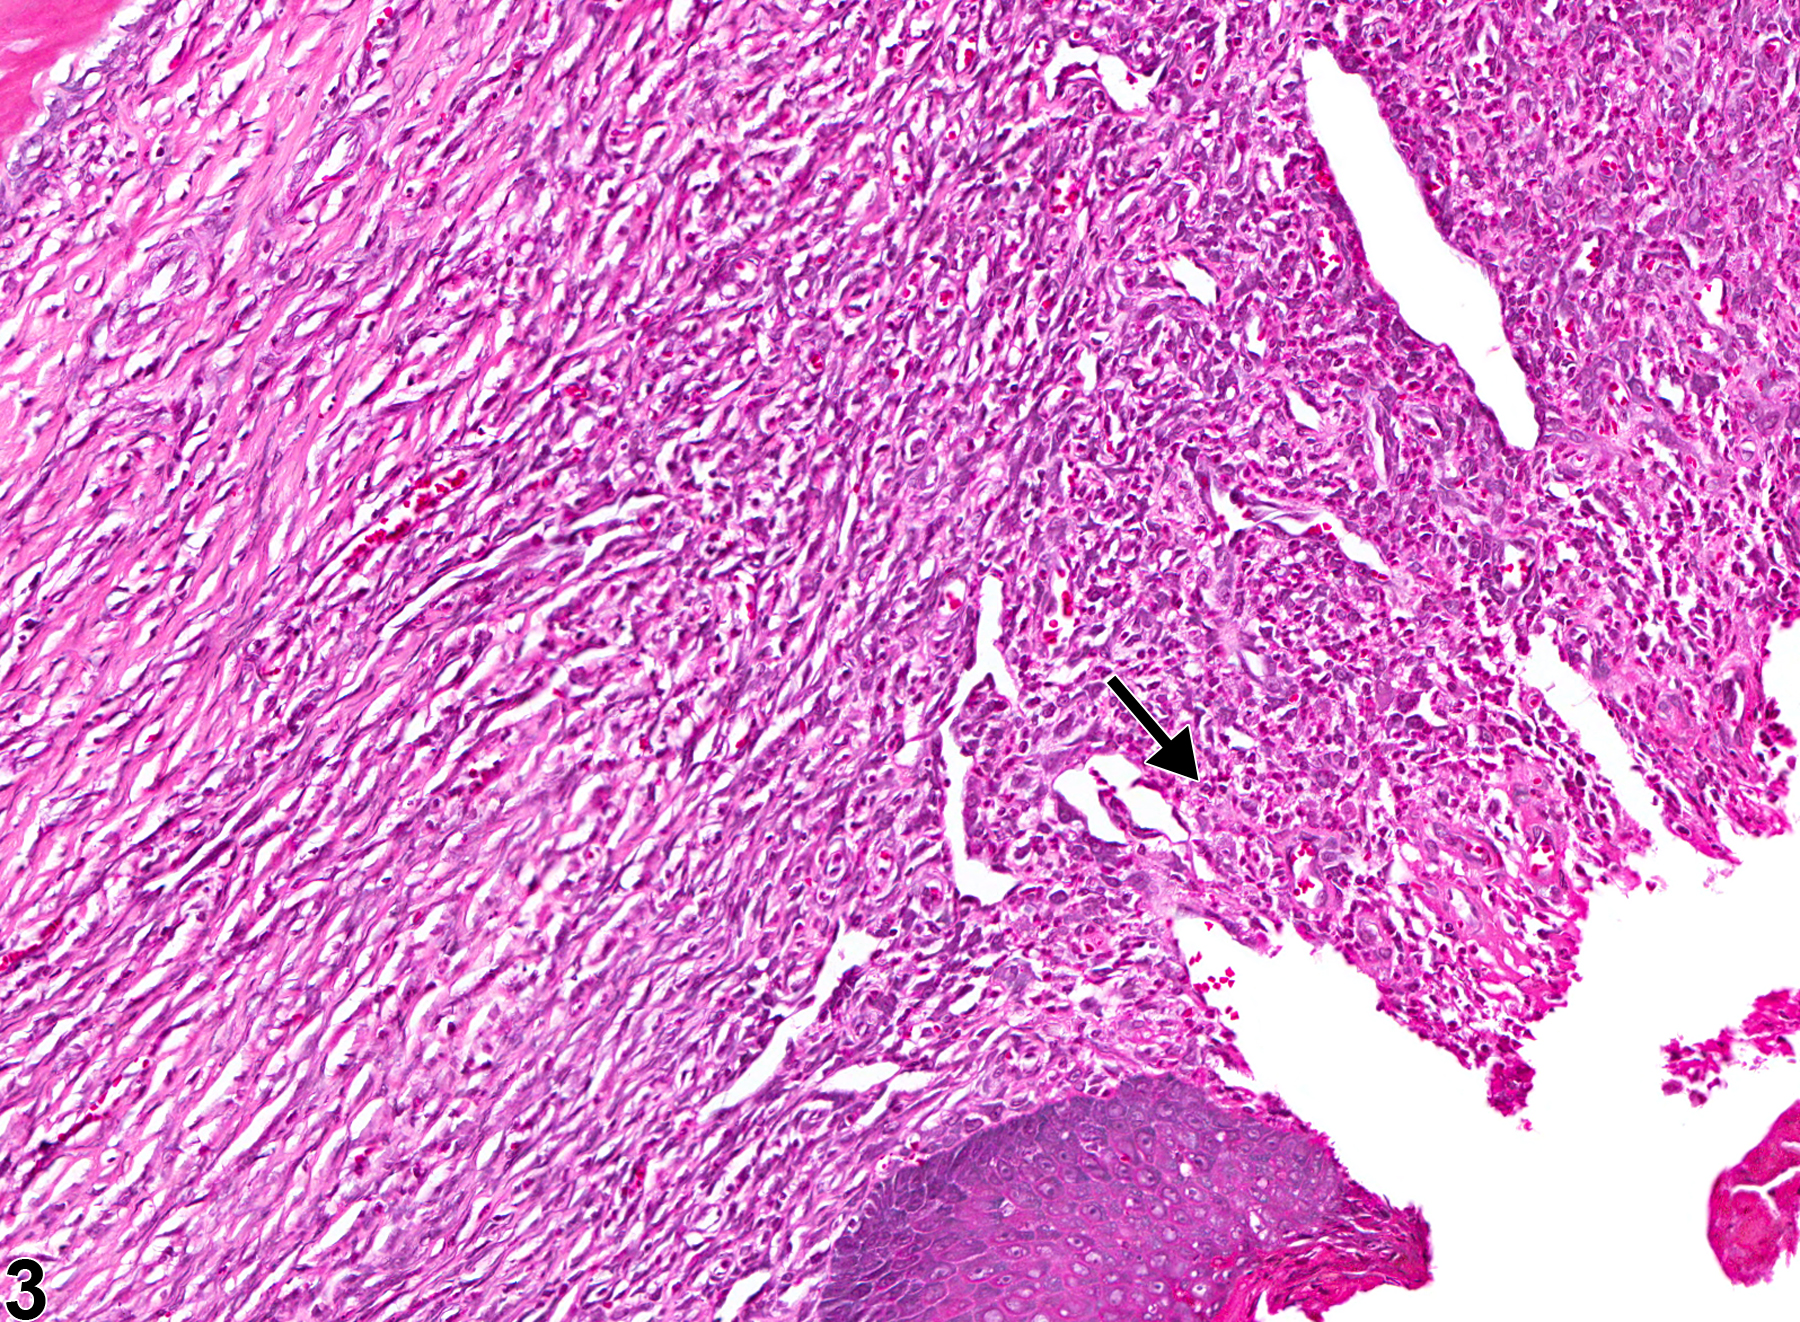 Image of inflammation in the oral mucosa from a male F344/N rat in a chronic study